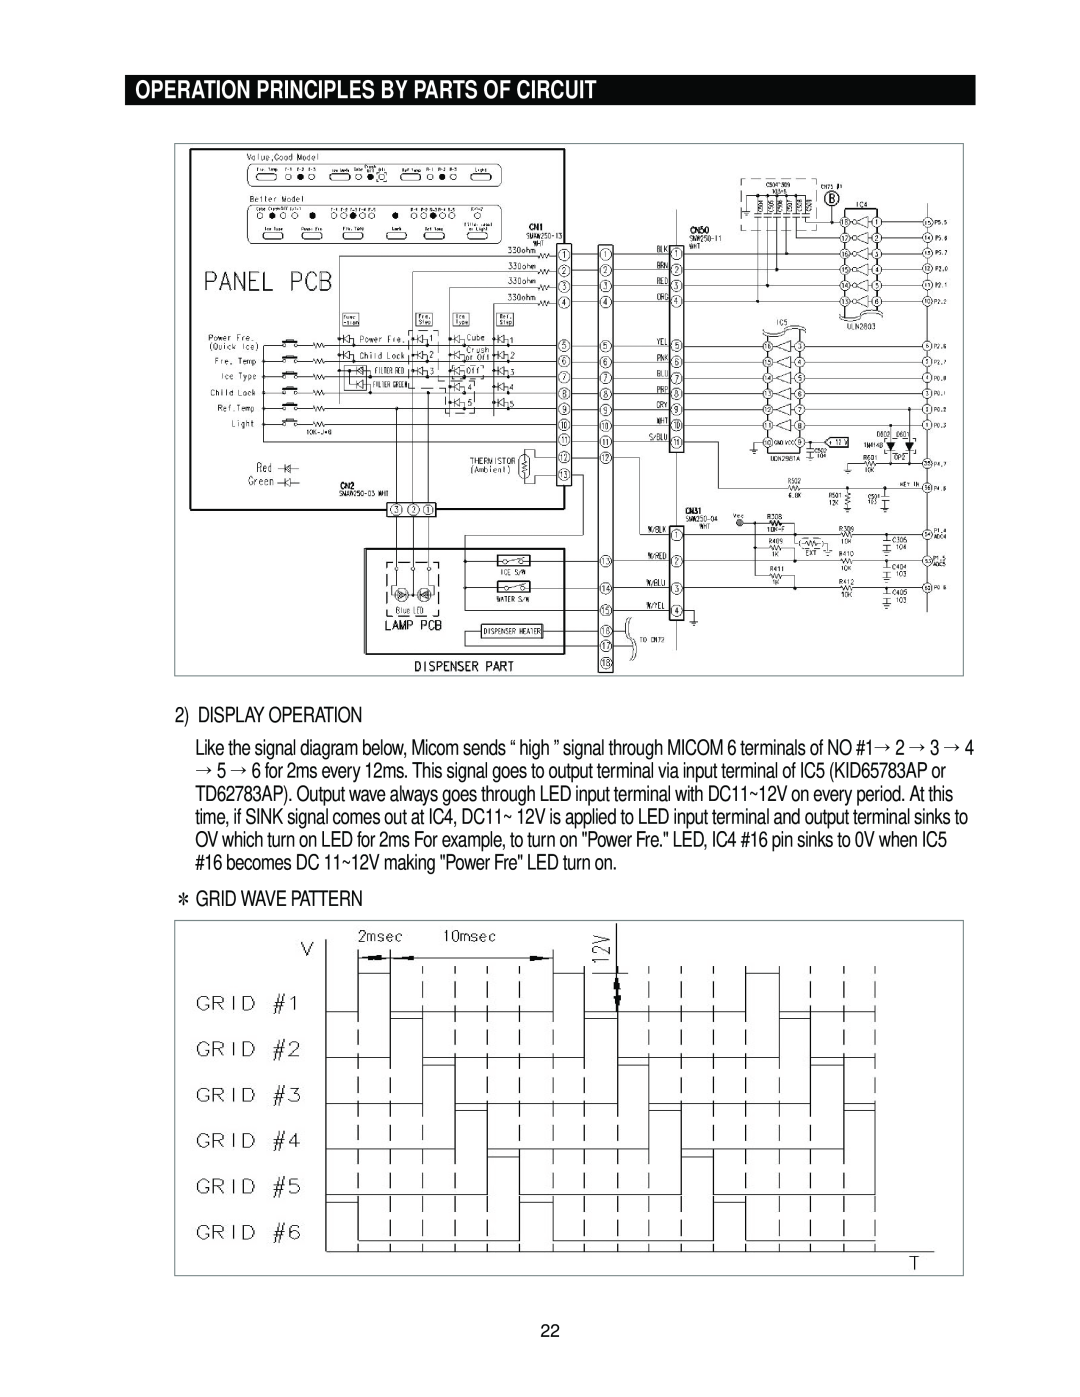 Samsung RS2*3* manual Operation Principles By Parts Of Circuit, Display Operation, Grid Wave Pattern 